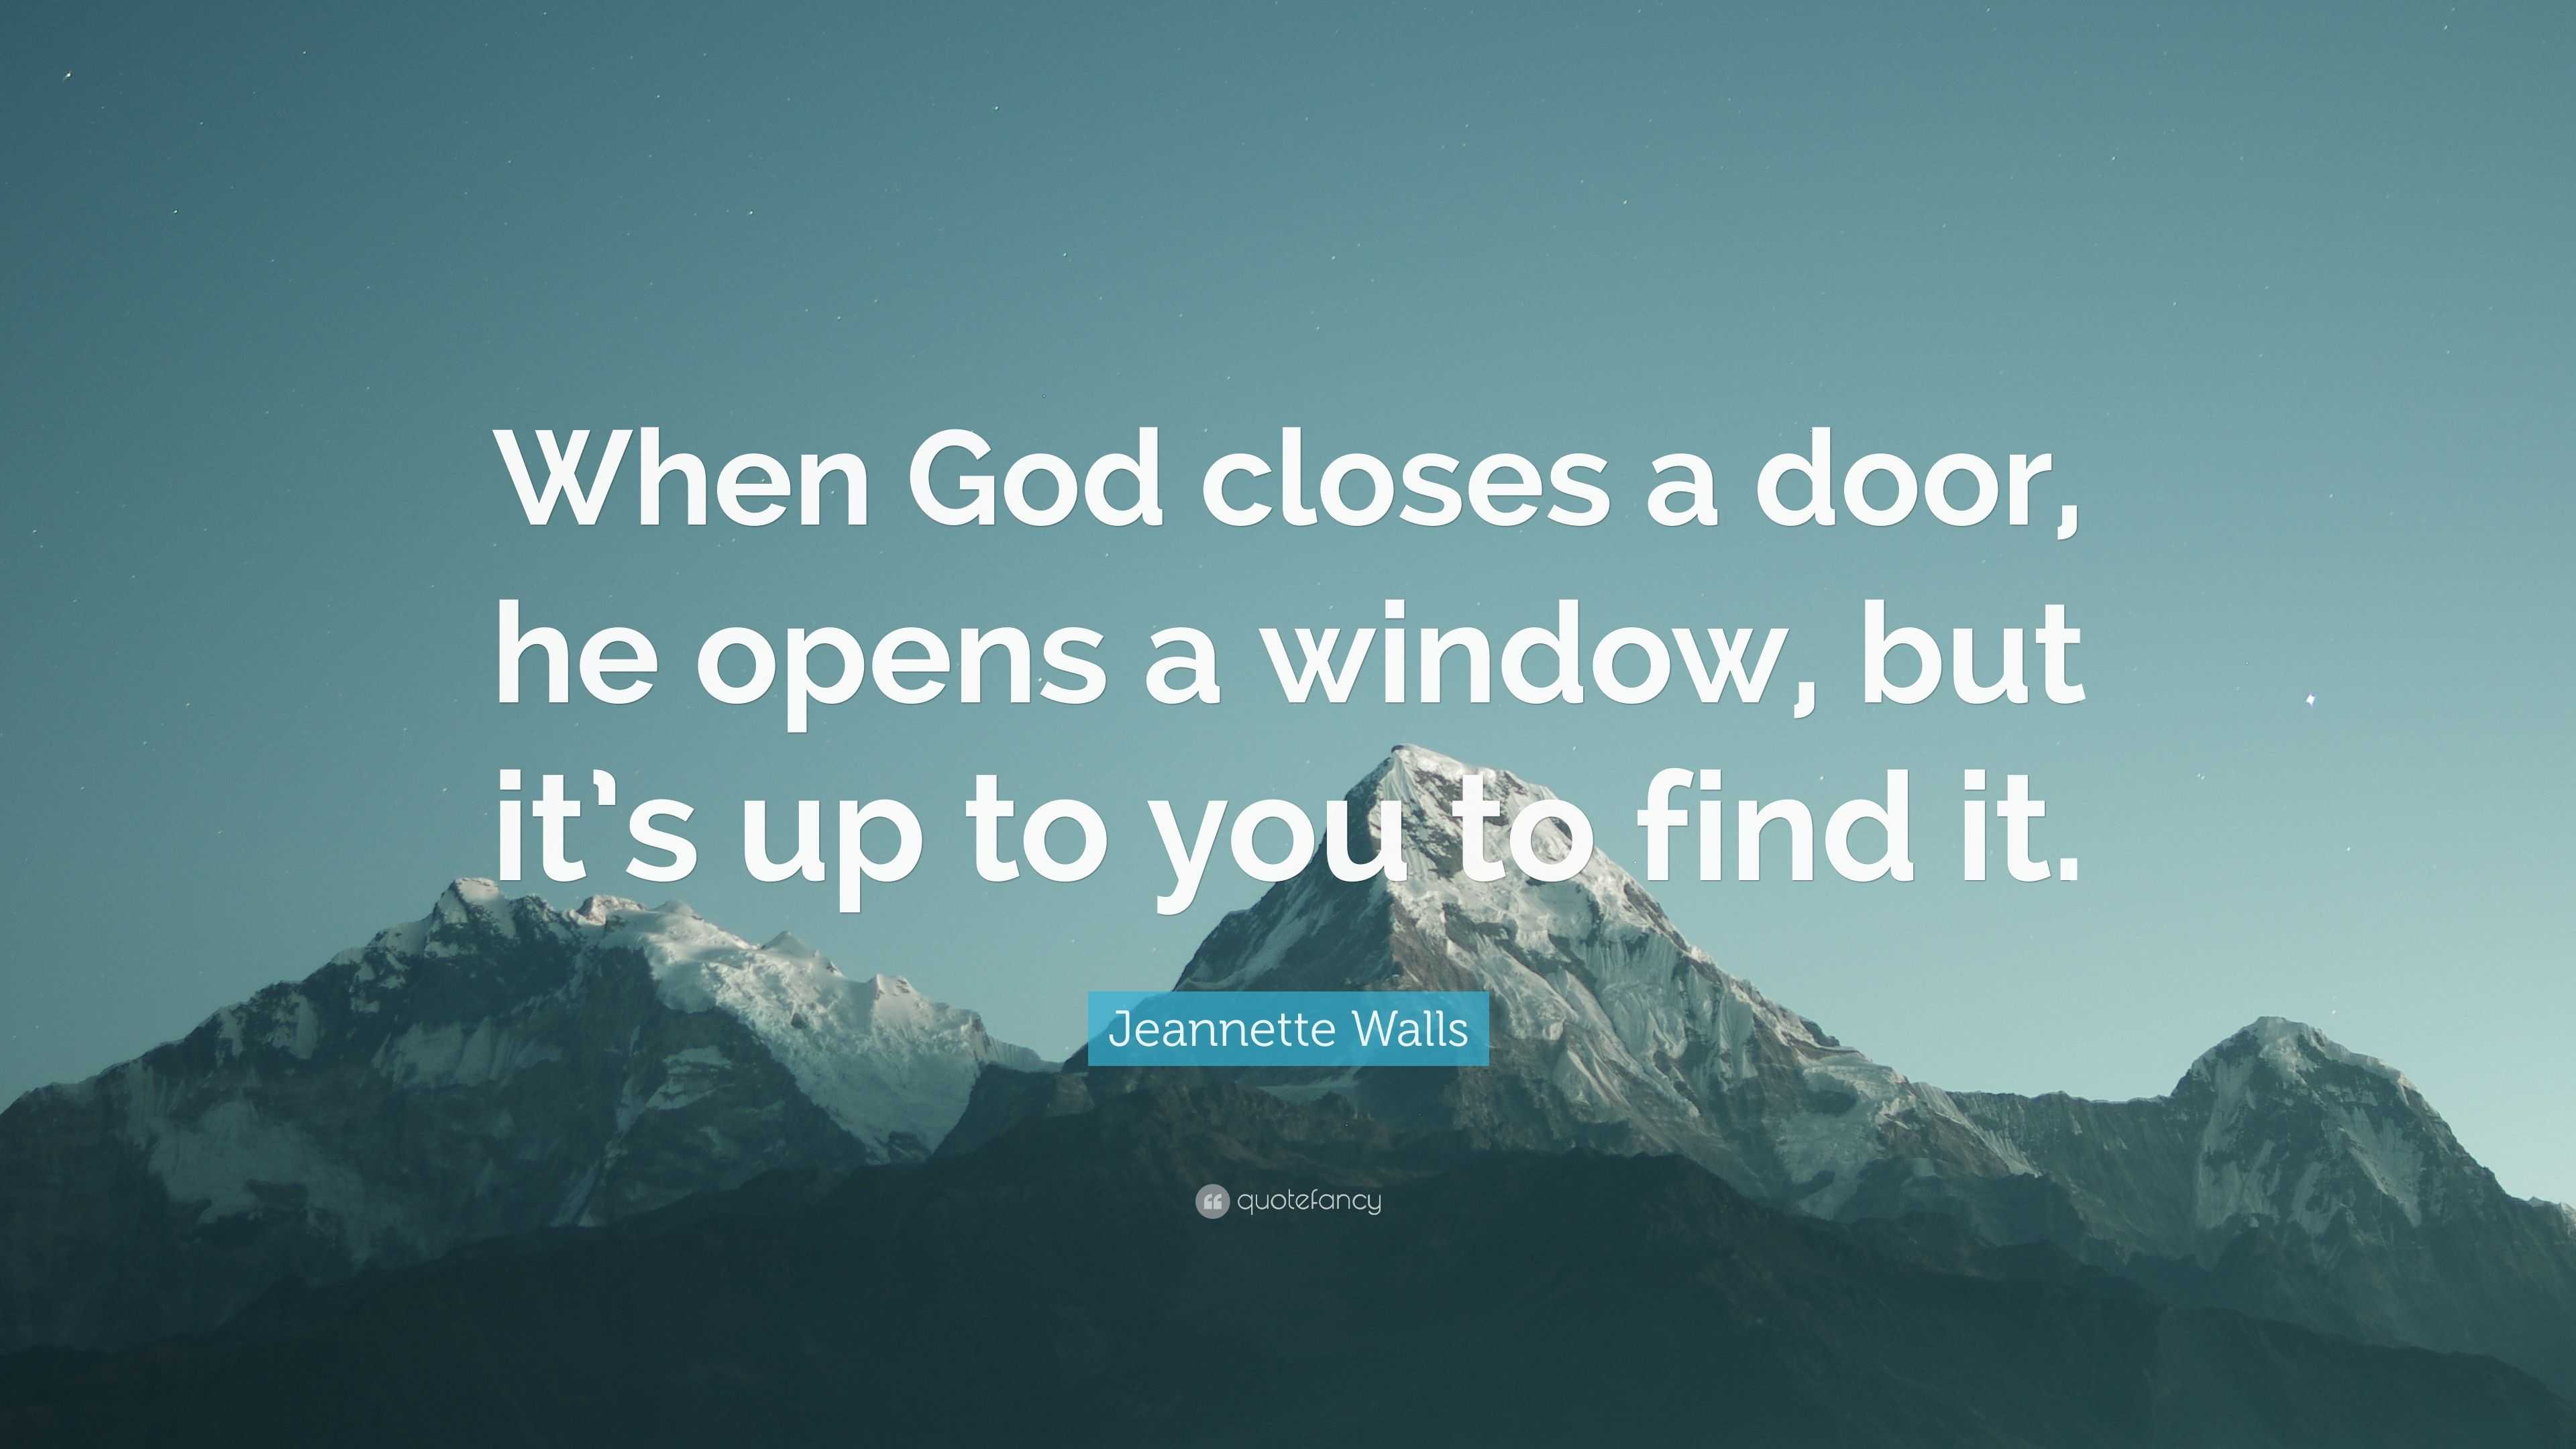 Jeannette Walls Quote: “When God closes a door, he opens a window, but ...